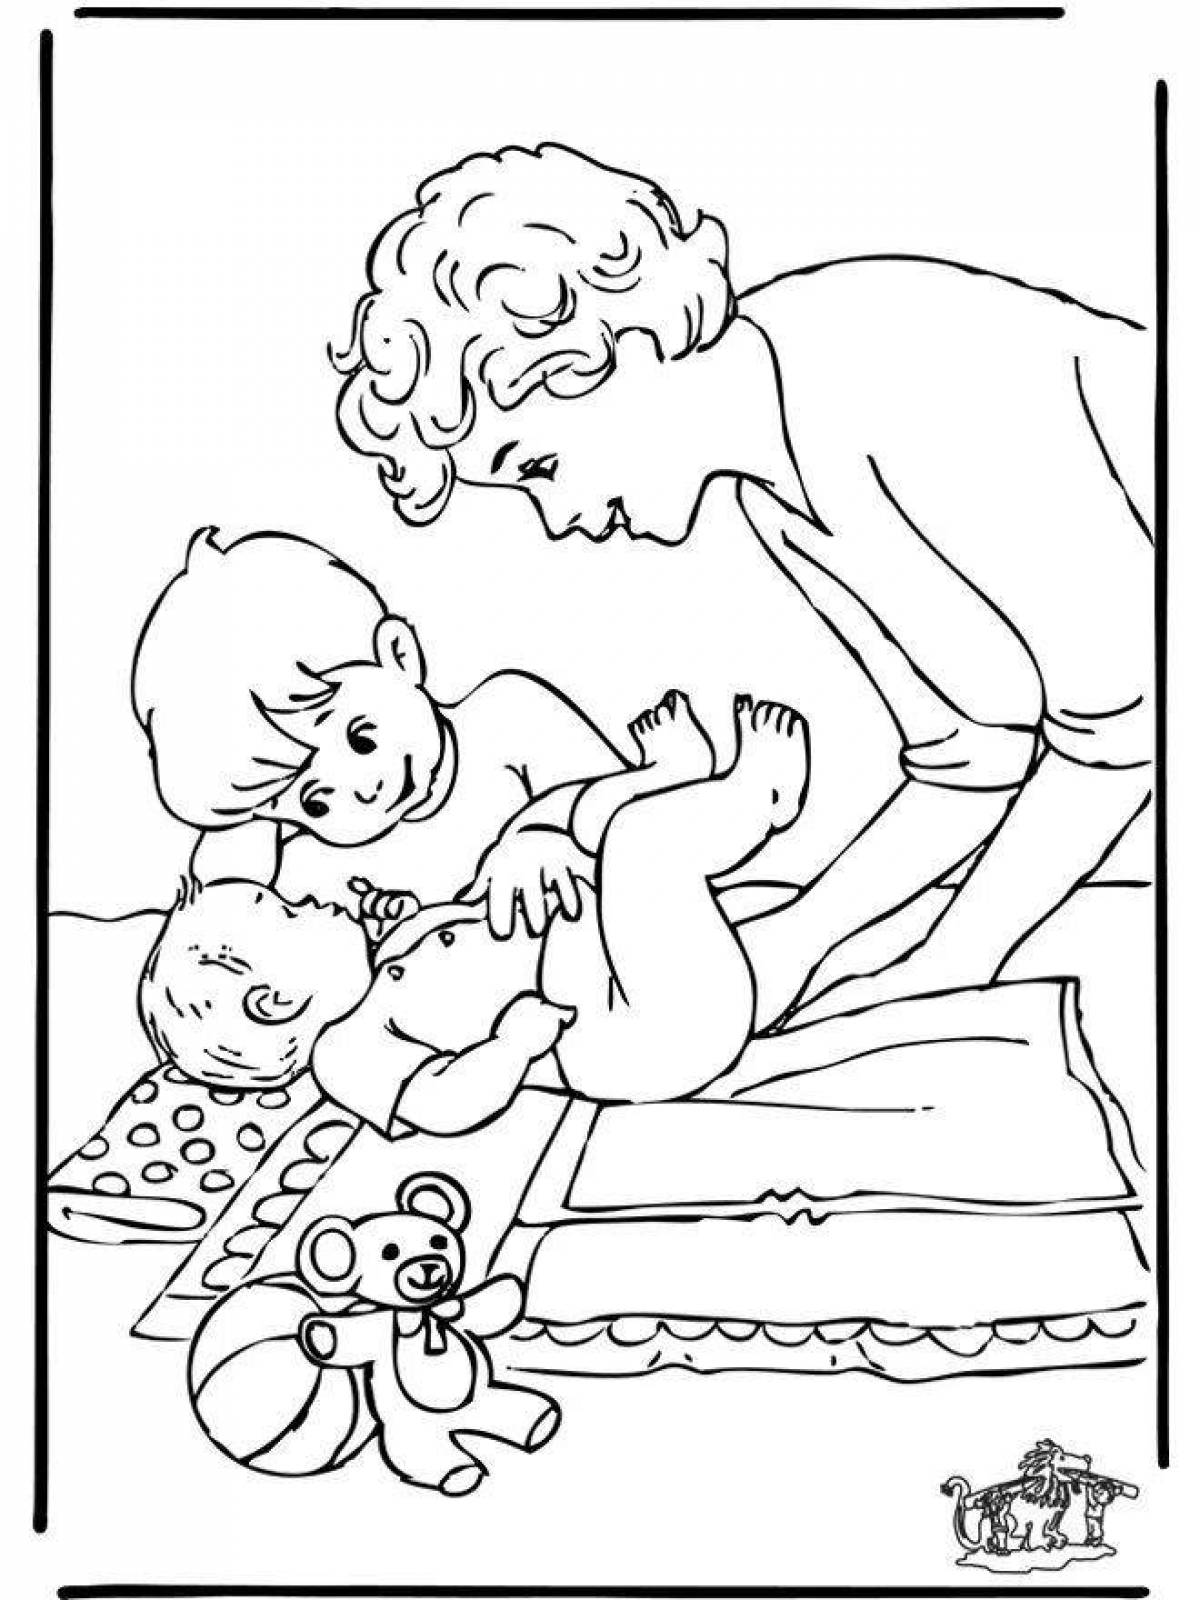 Coloring page gentle mother and baby